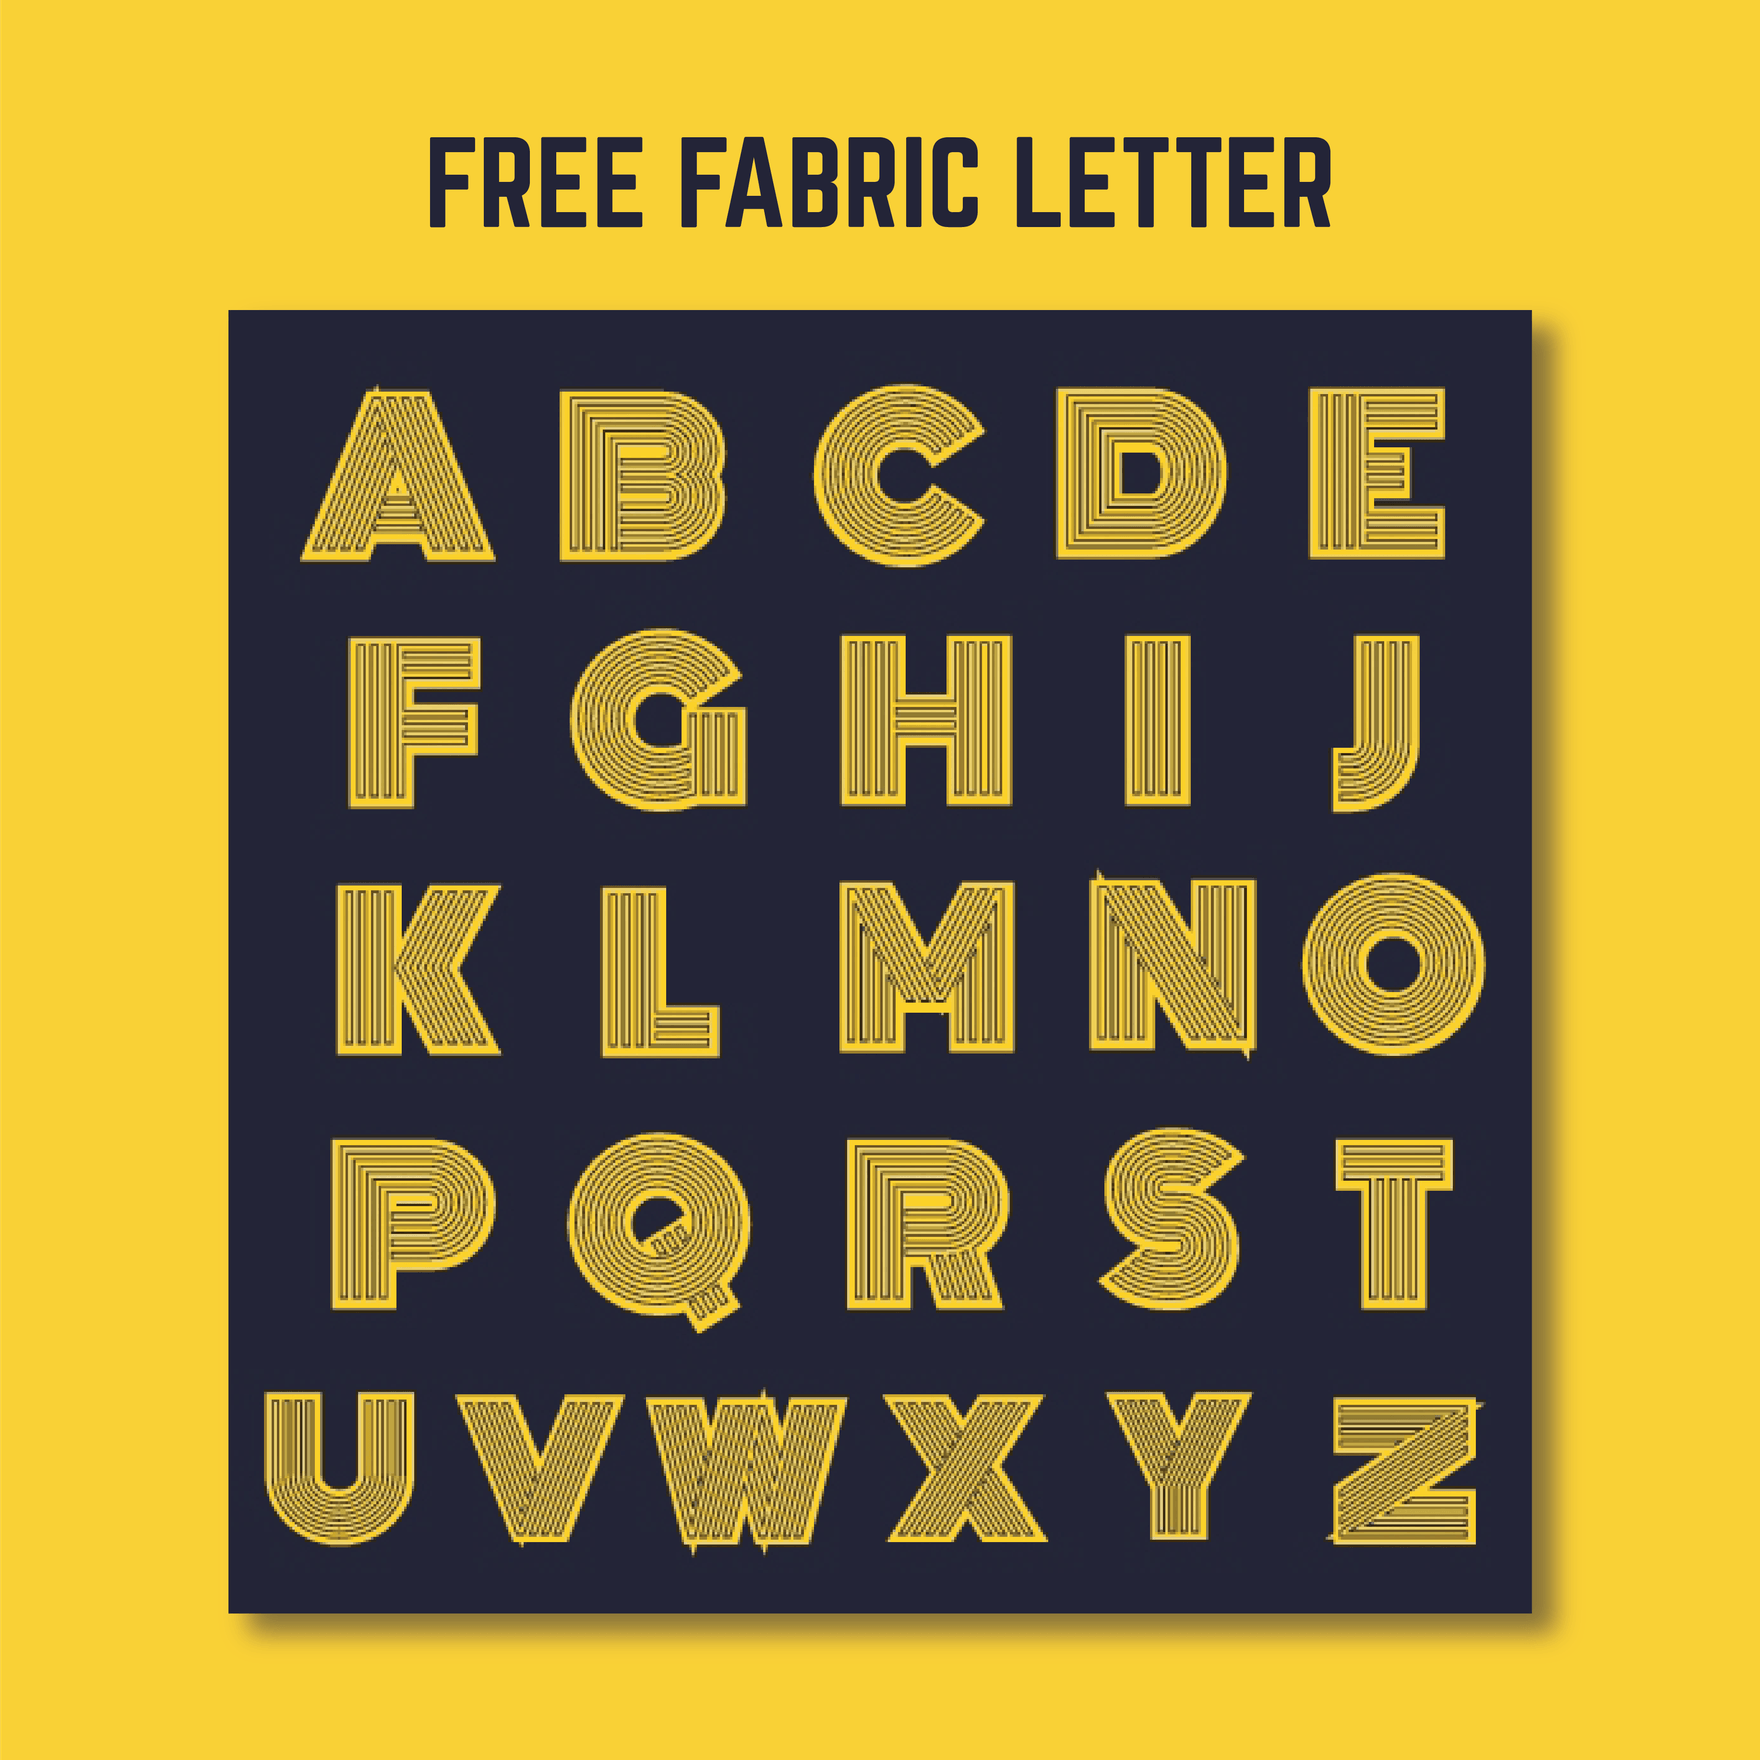 fabric-letter